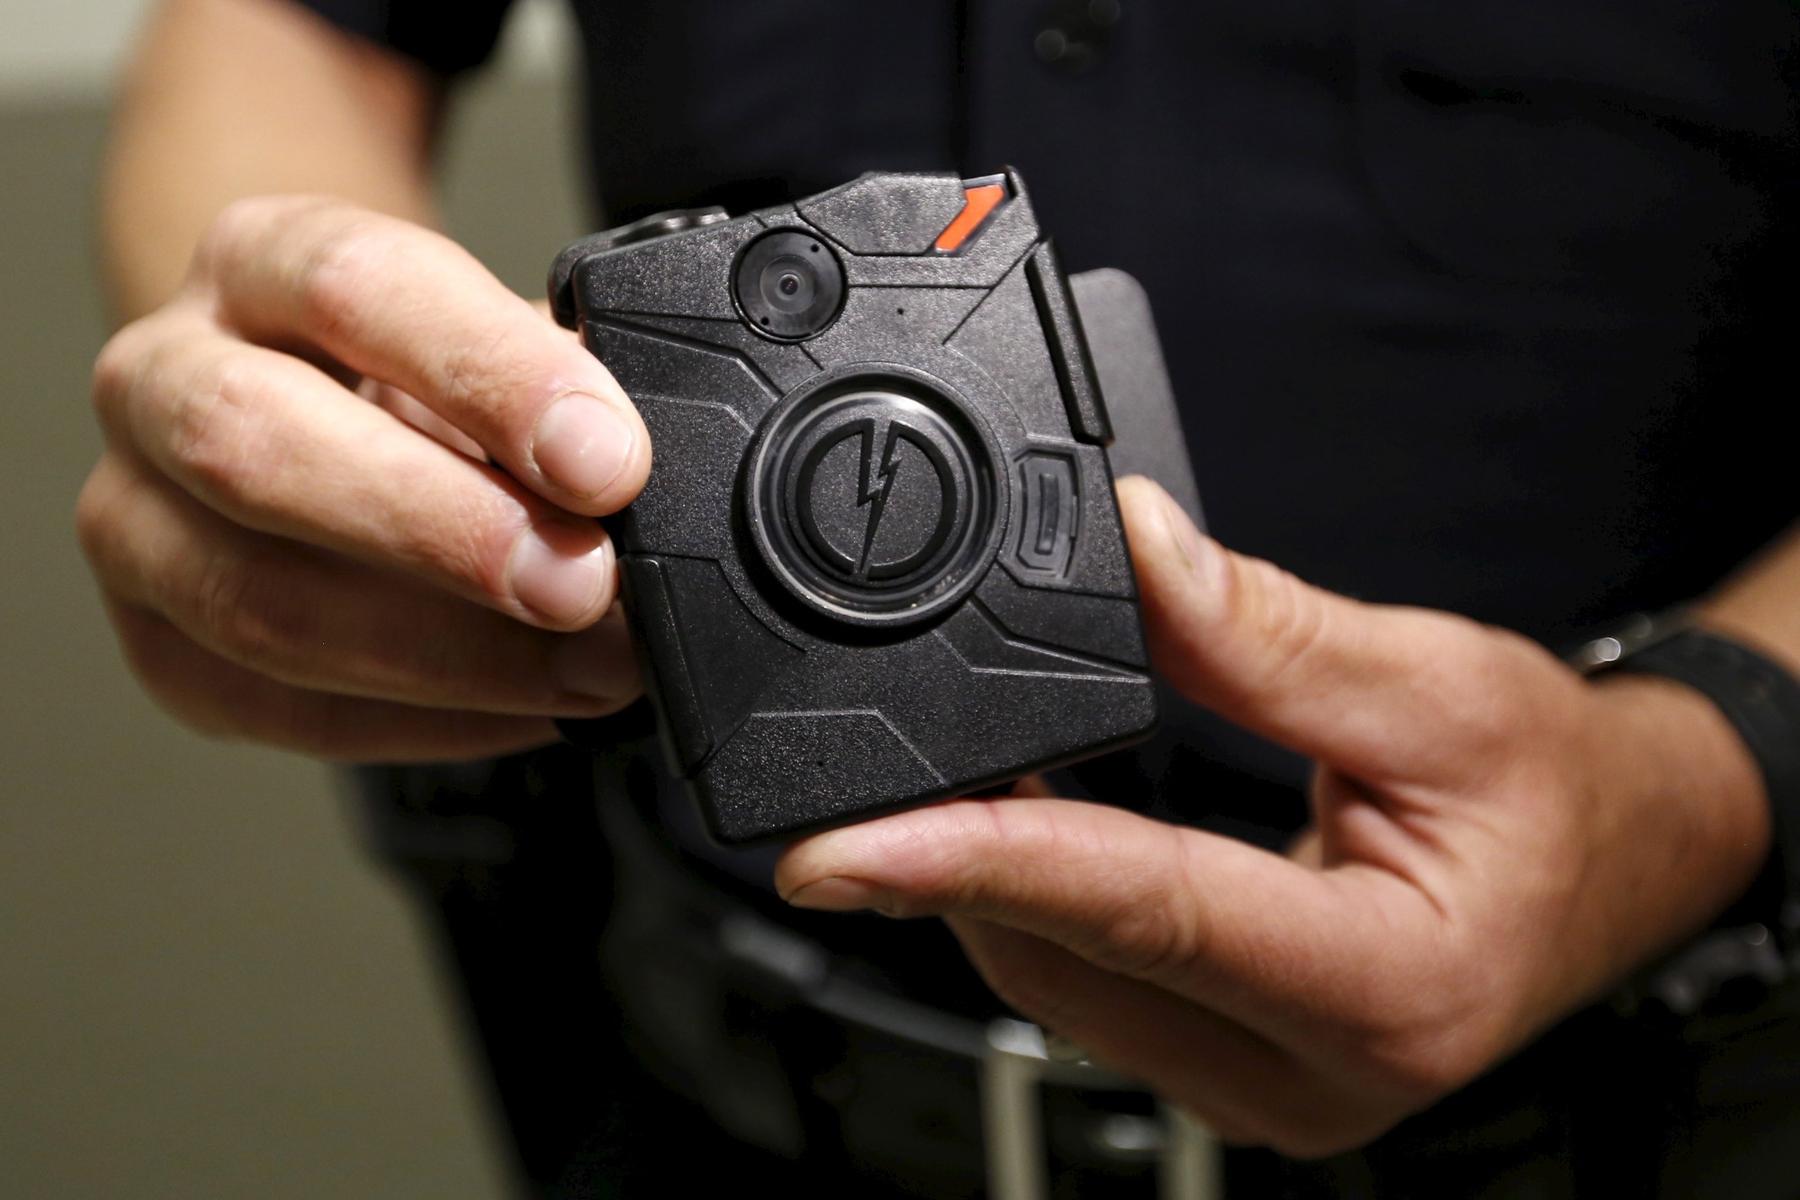 Police body cameras can be a positive accountability tool, but